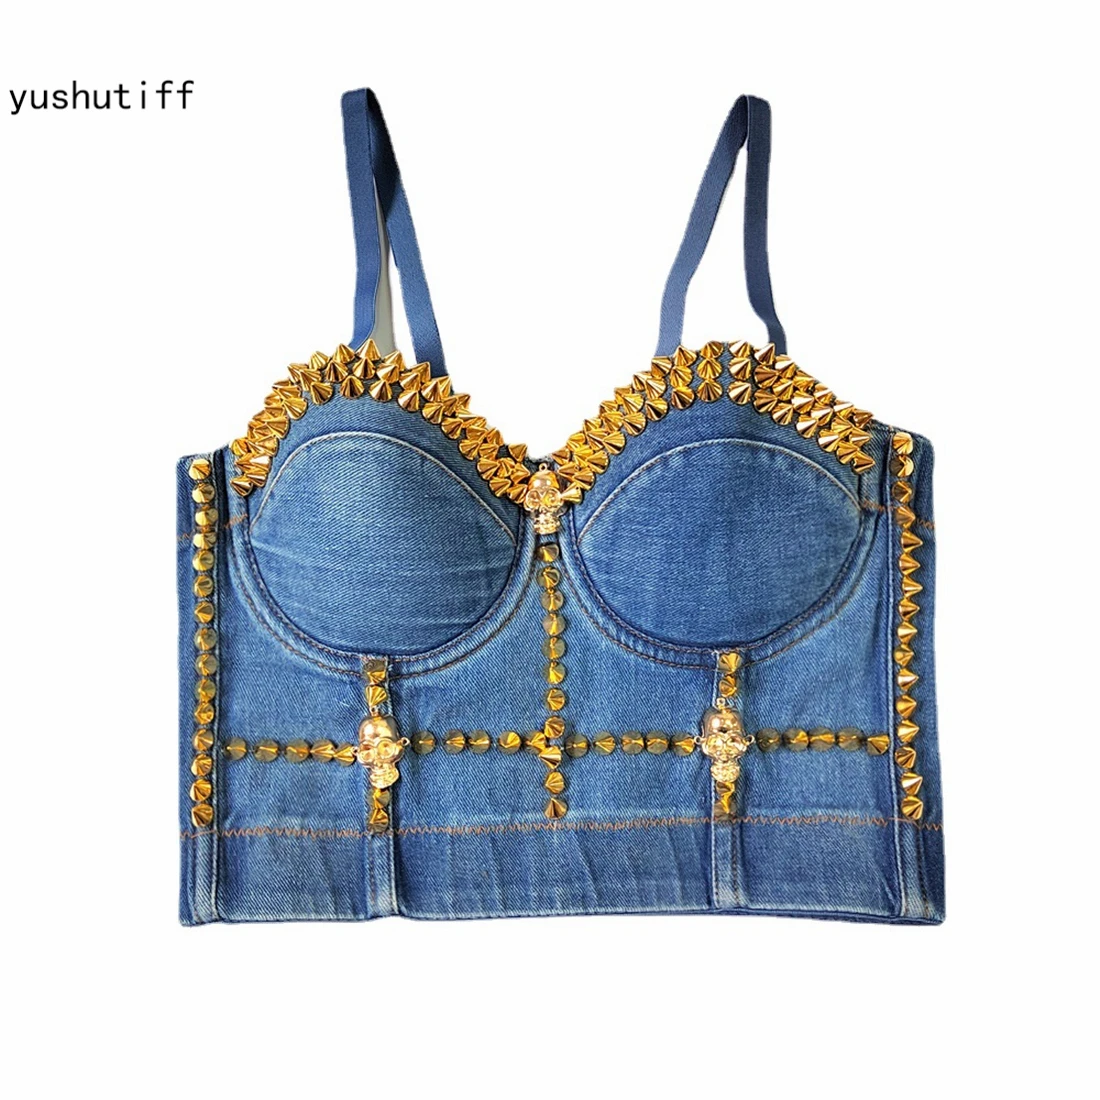 

Crop Top Sexy Denim Studed Corset Bra Nightclub Party Bustier Fashion Show Clothing Rave Festival lingerie Female Vests